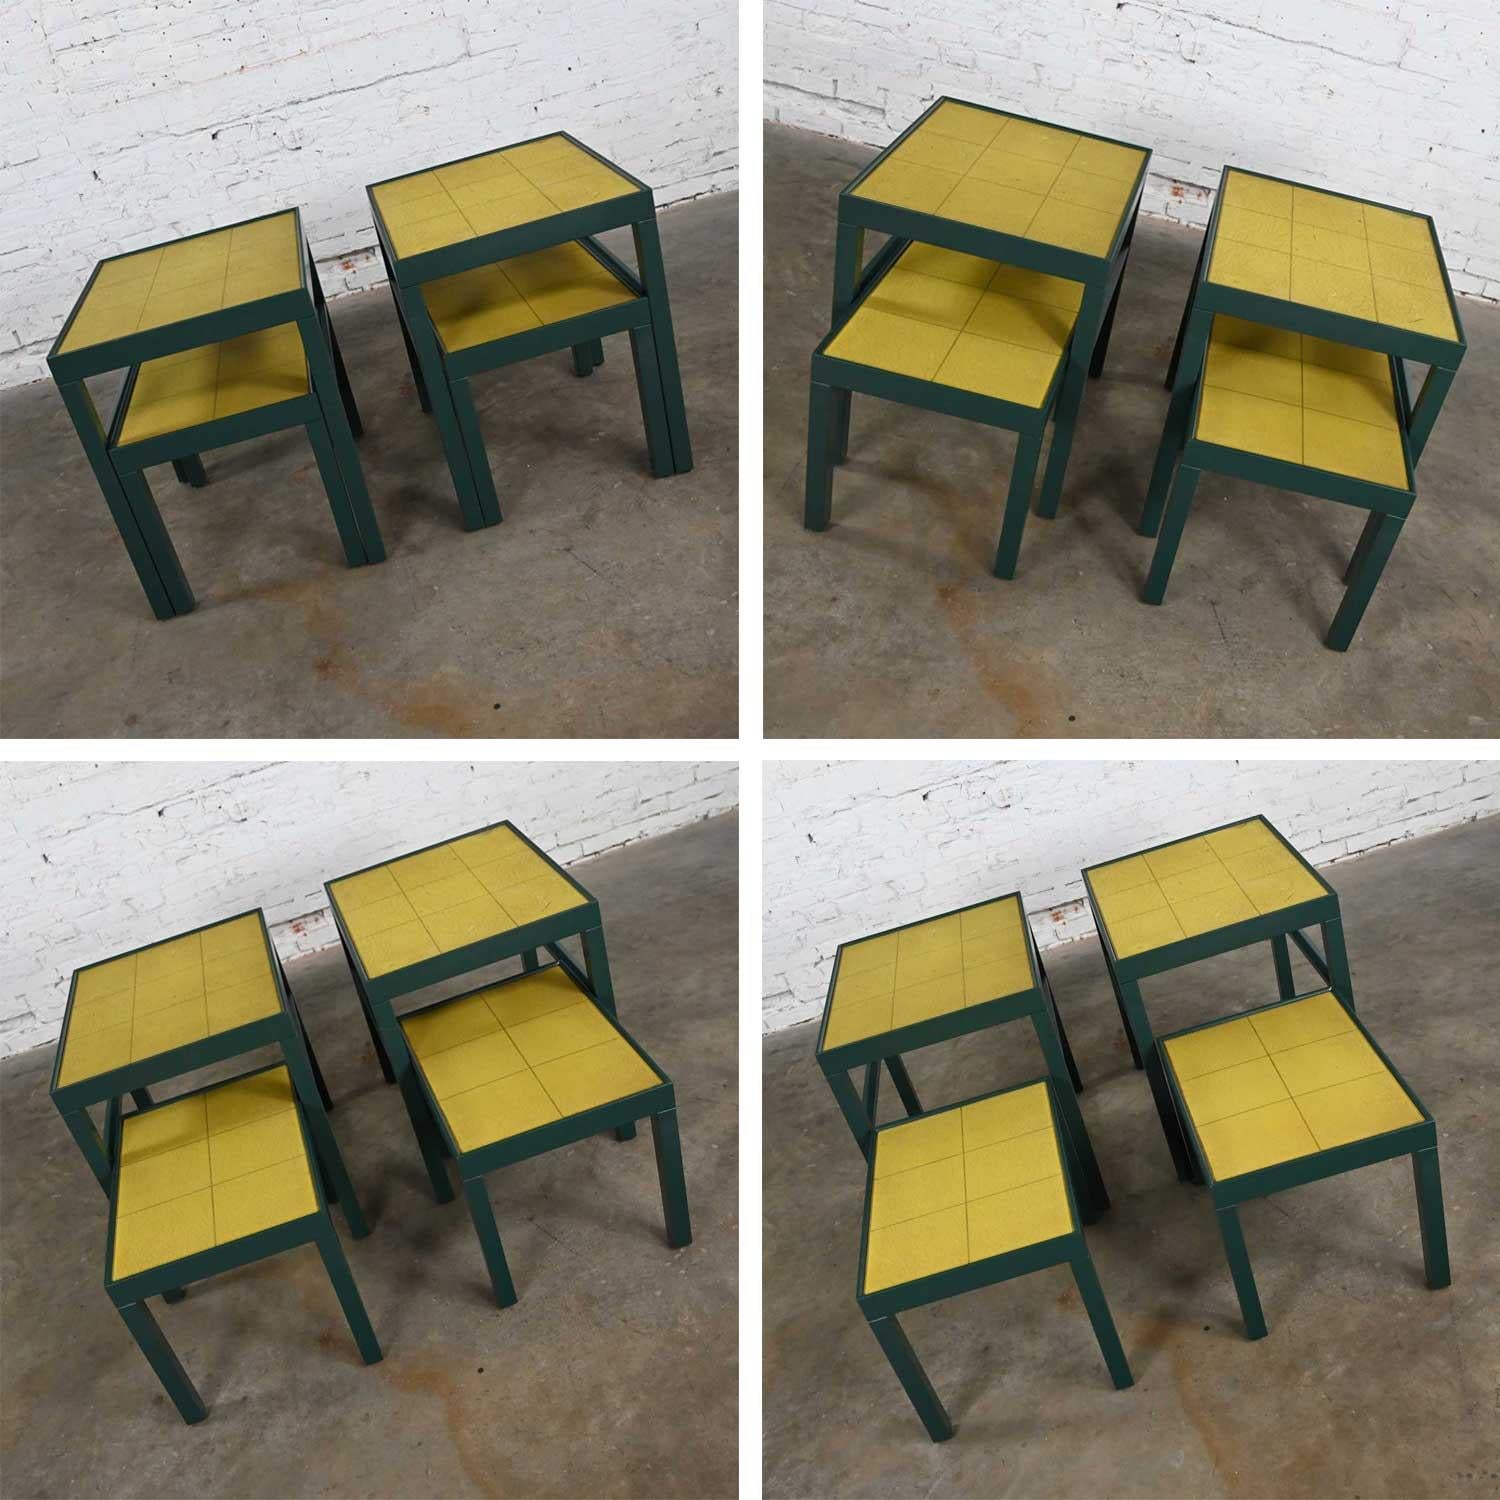 Vintage Campaign Nesting Tables Chartreuse Leather Tops 2 Sets of 2 by Kittinger 4